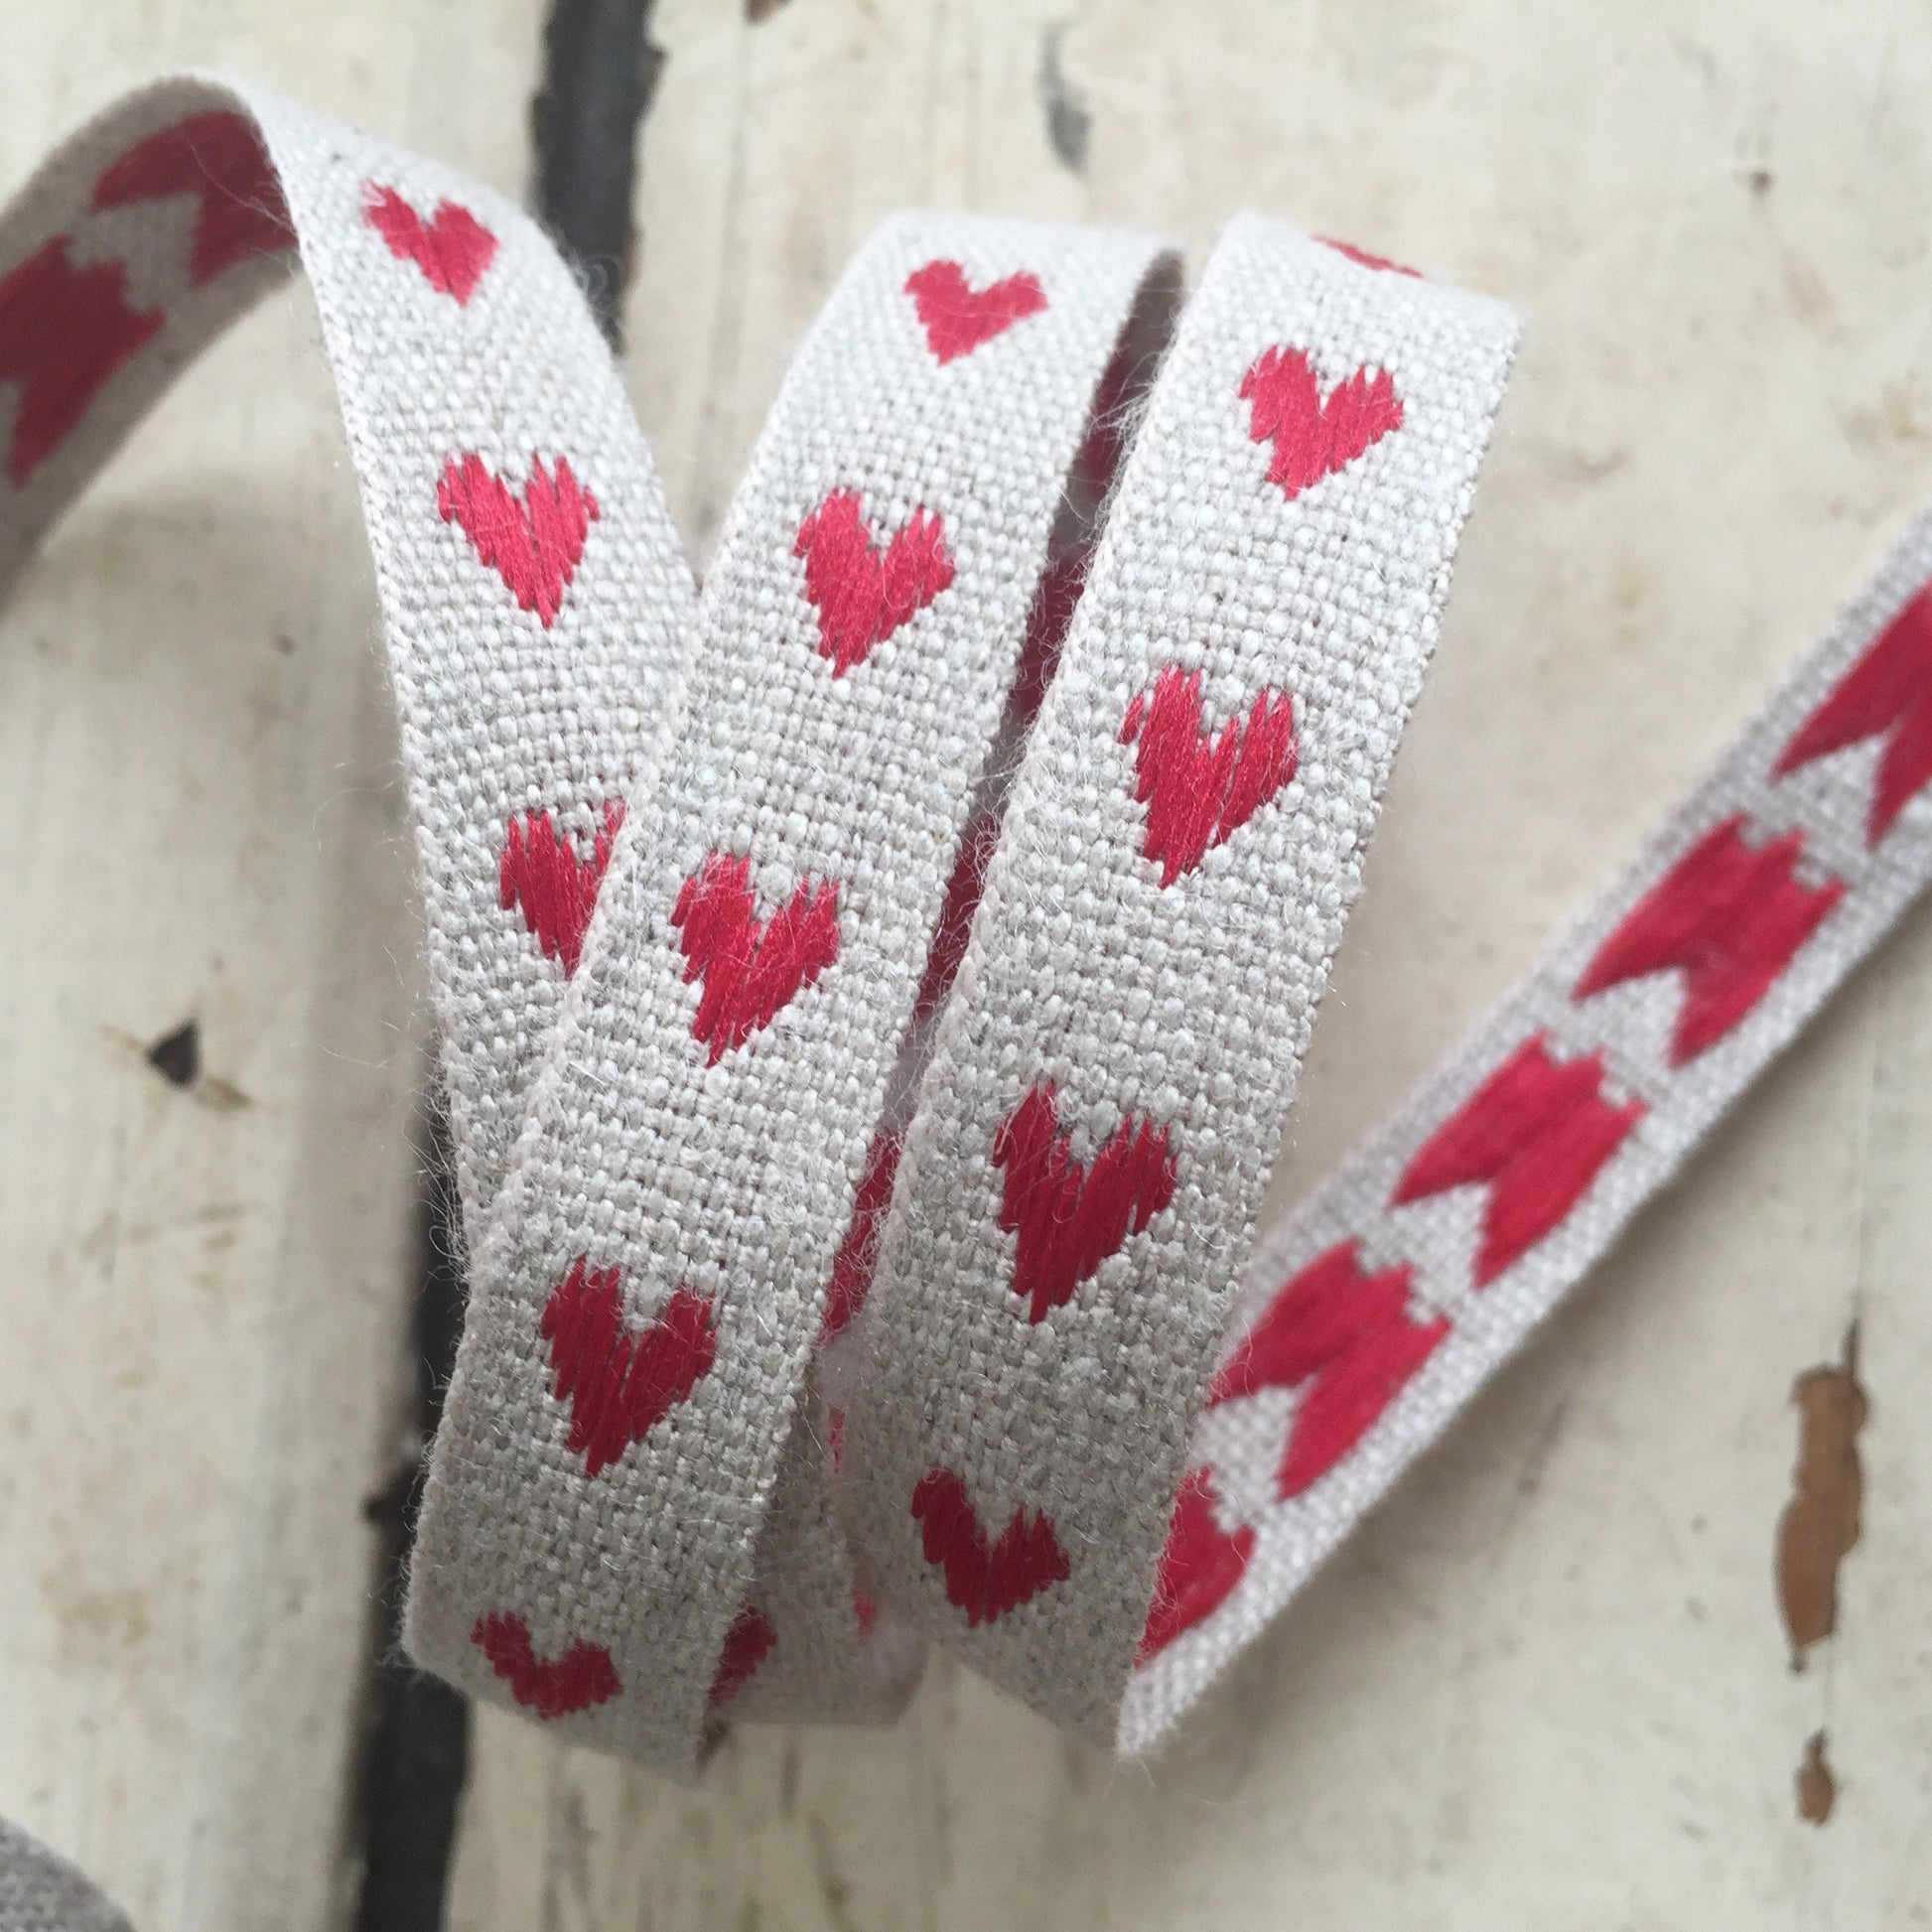 Linen Woven Heart Ribbon 10mm Rustic Red & Natural Cream | Craft Sewing Wedding Wrapping | Per Metre or Full 25m Roll - SweetpeaStore